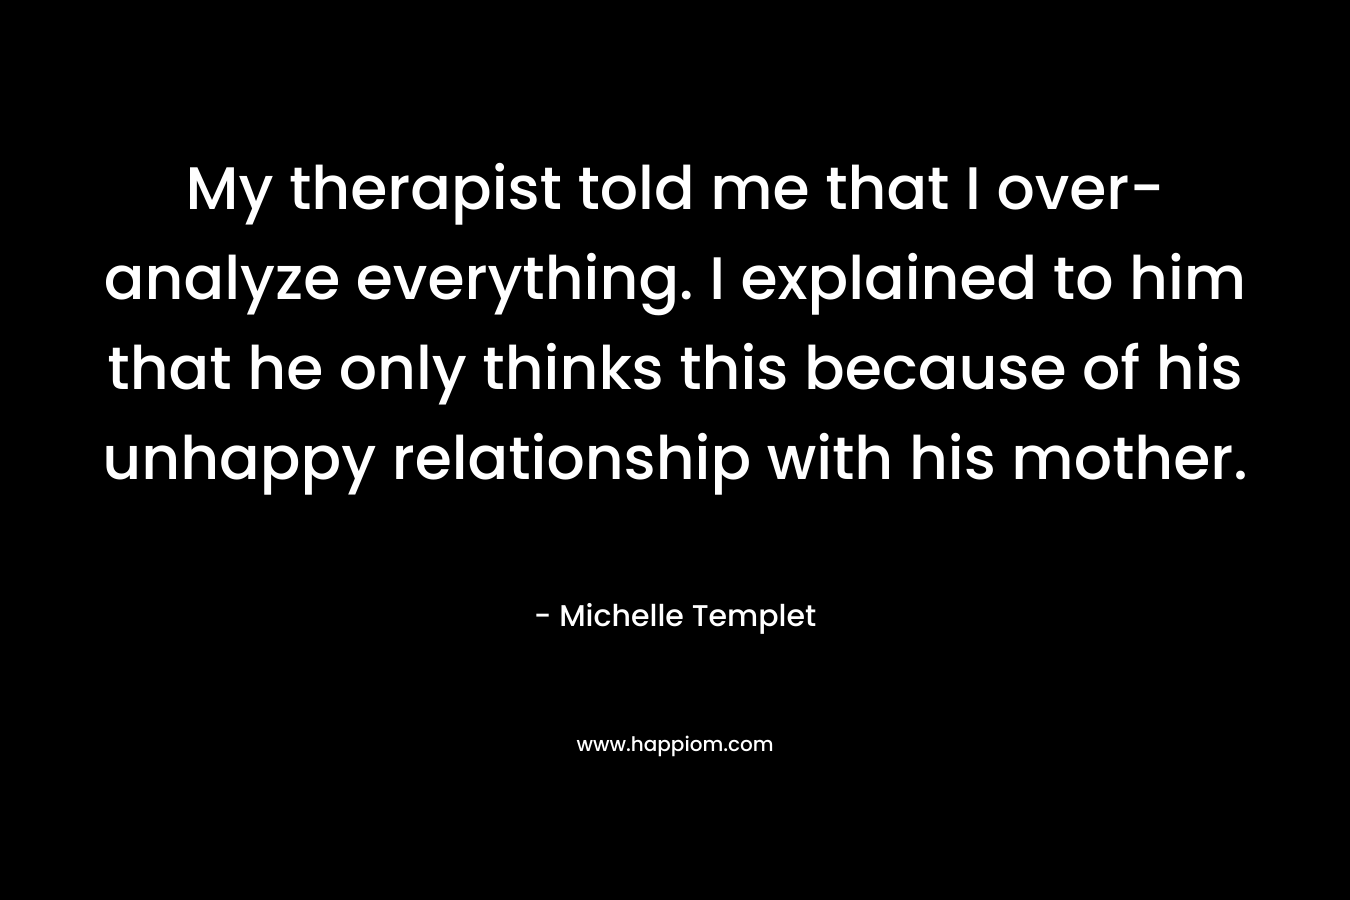 My therapist told me that I over-analyze everything. I explained to him that he only thinks this because of his unhappy relationship with his mother. – Michelle Templet